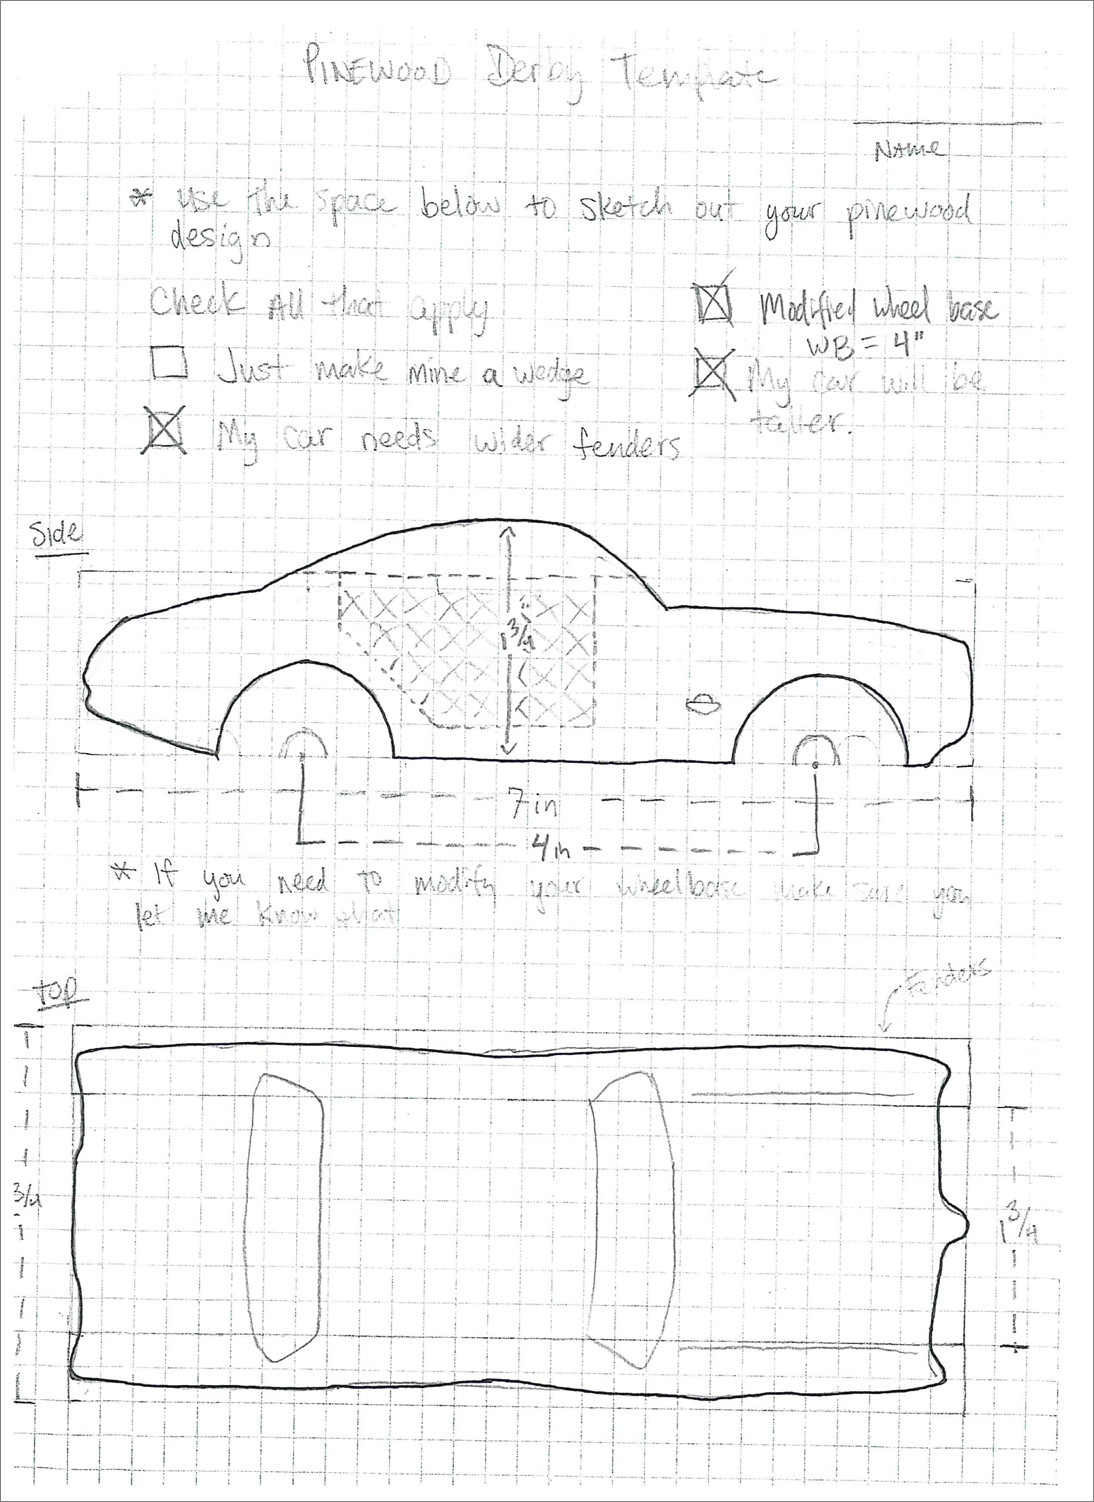 Pinewood Derby Car Templates Bonus Sketchup assignment Pinewood Derby